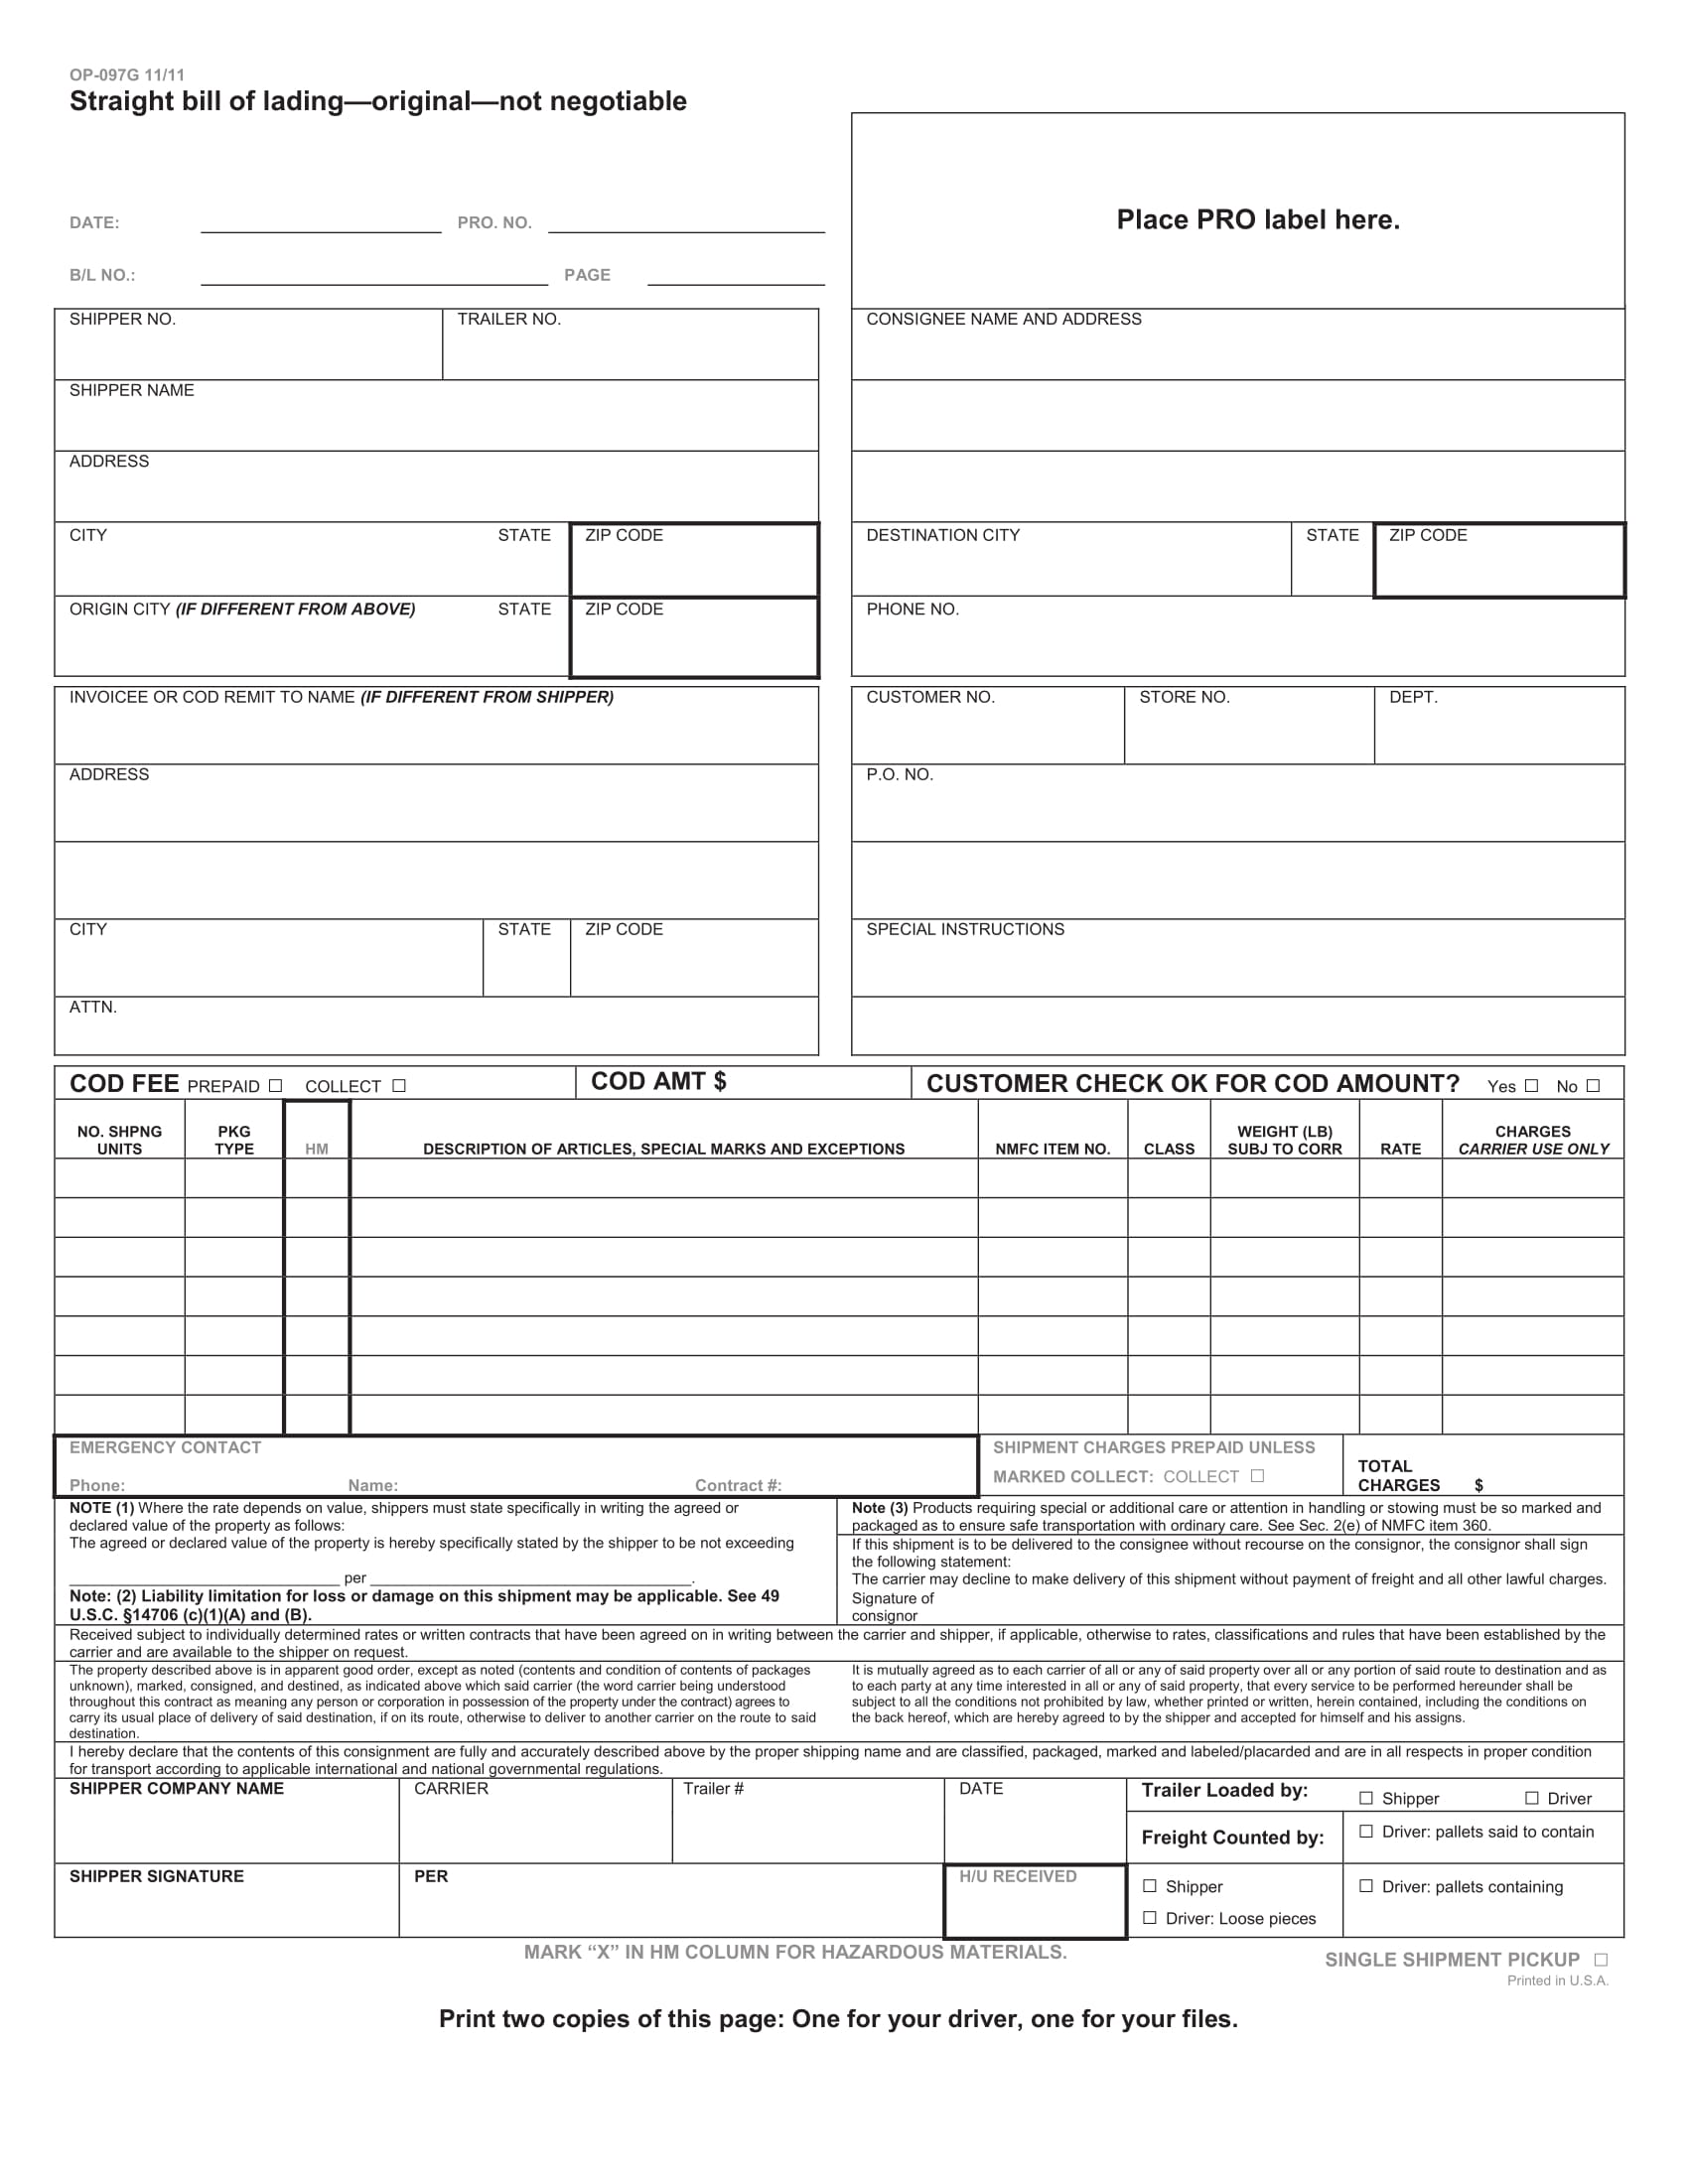 straight bill of lading form example 1